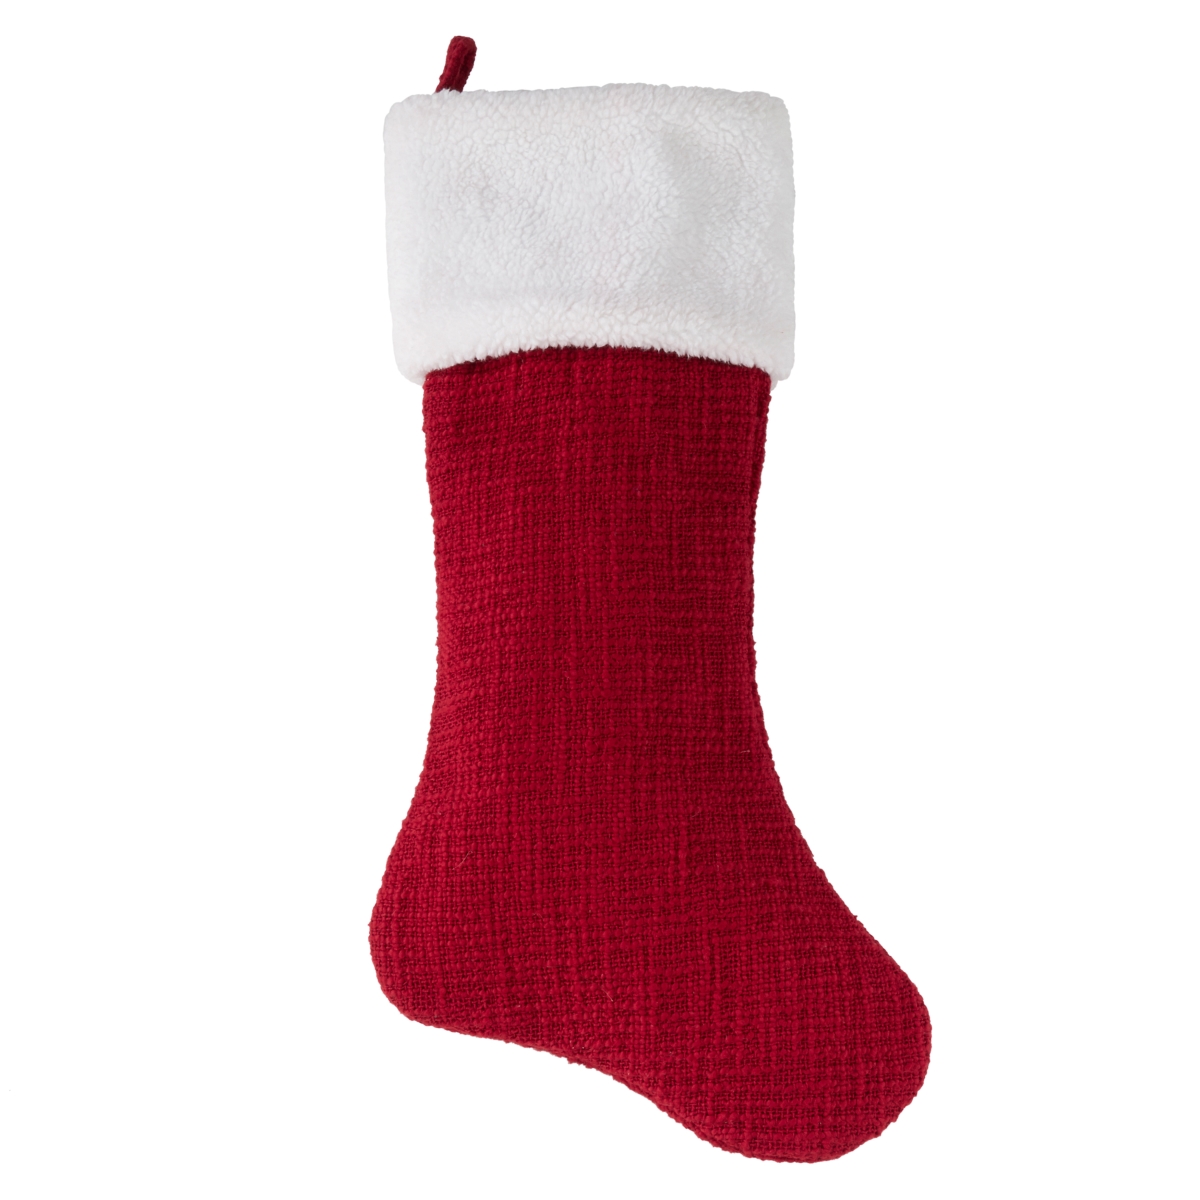 2050.r1319 Classic Cotton Christmas Stocking With Sherpa Cuff, Red